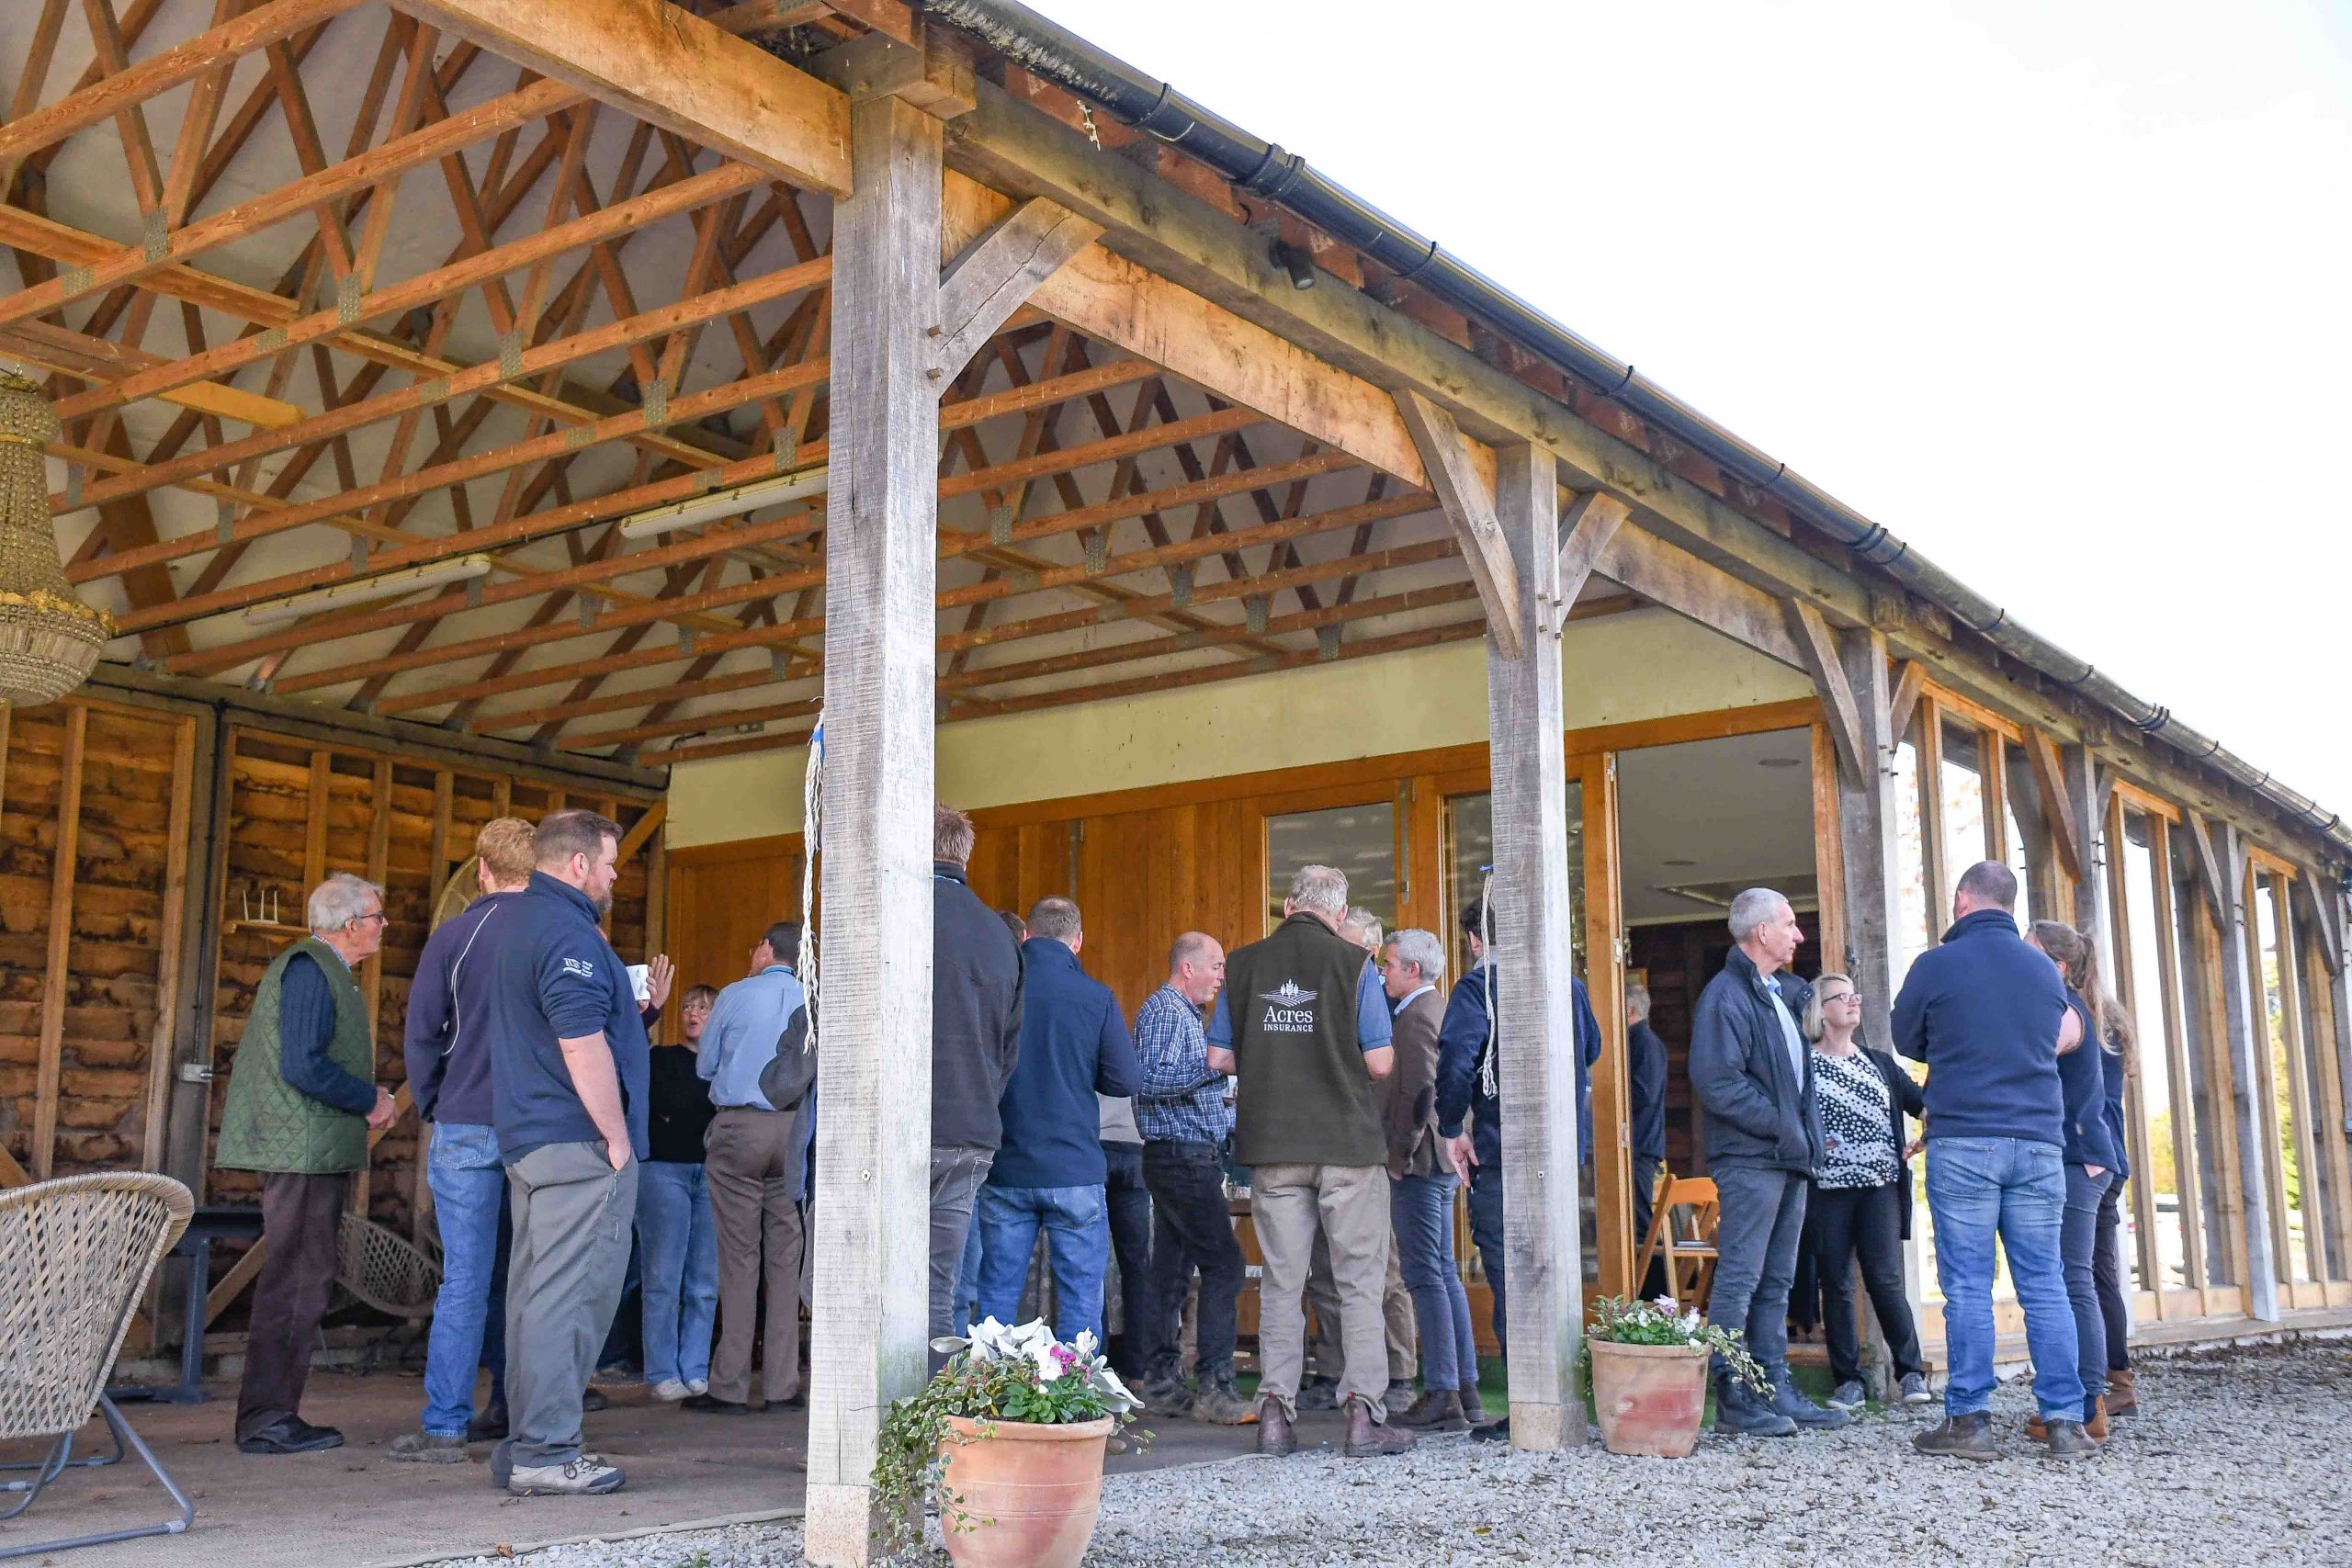 People standing in the Green Farm barn for lunch during the Upper Beult Cluster Meeting.